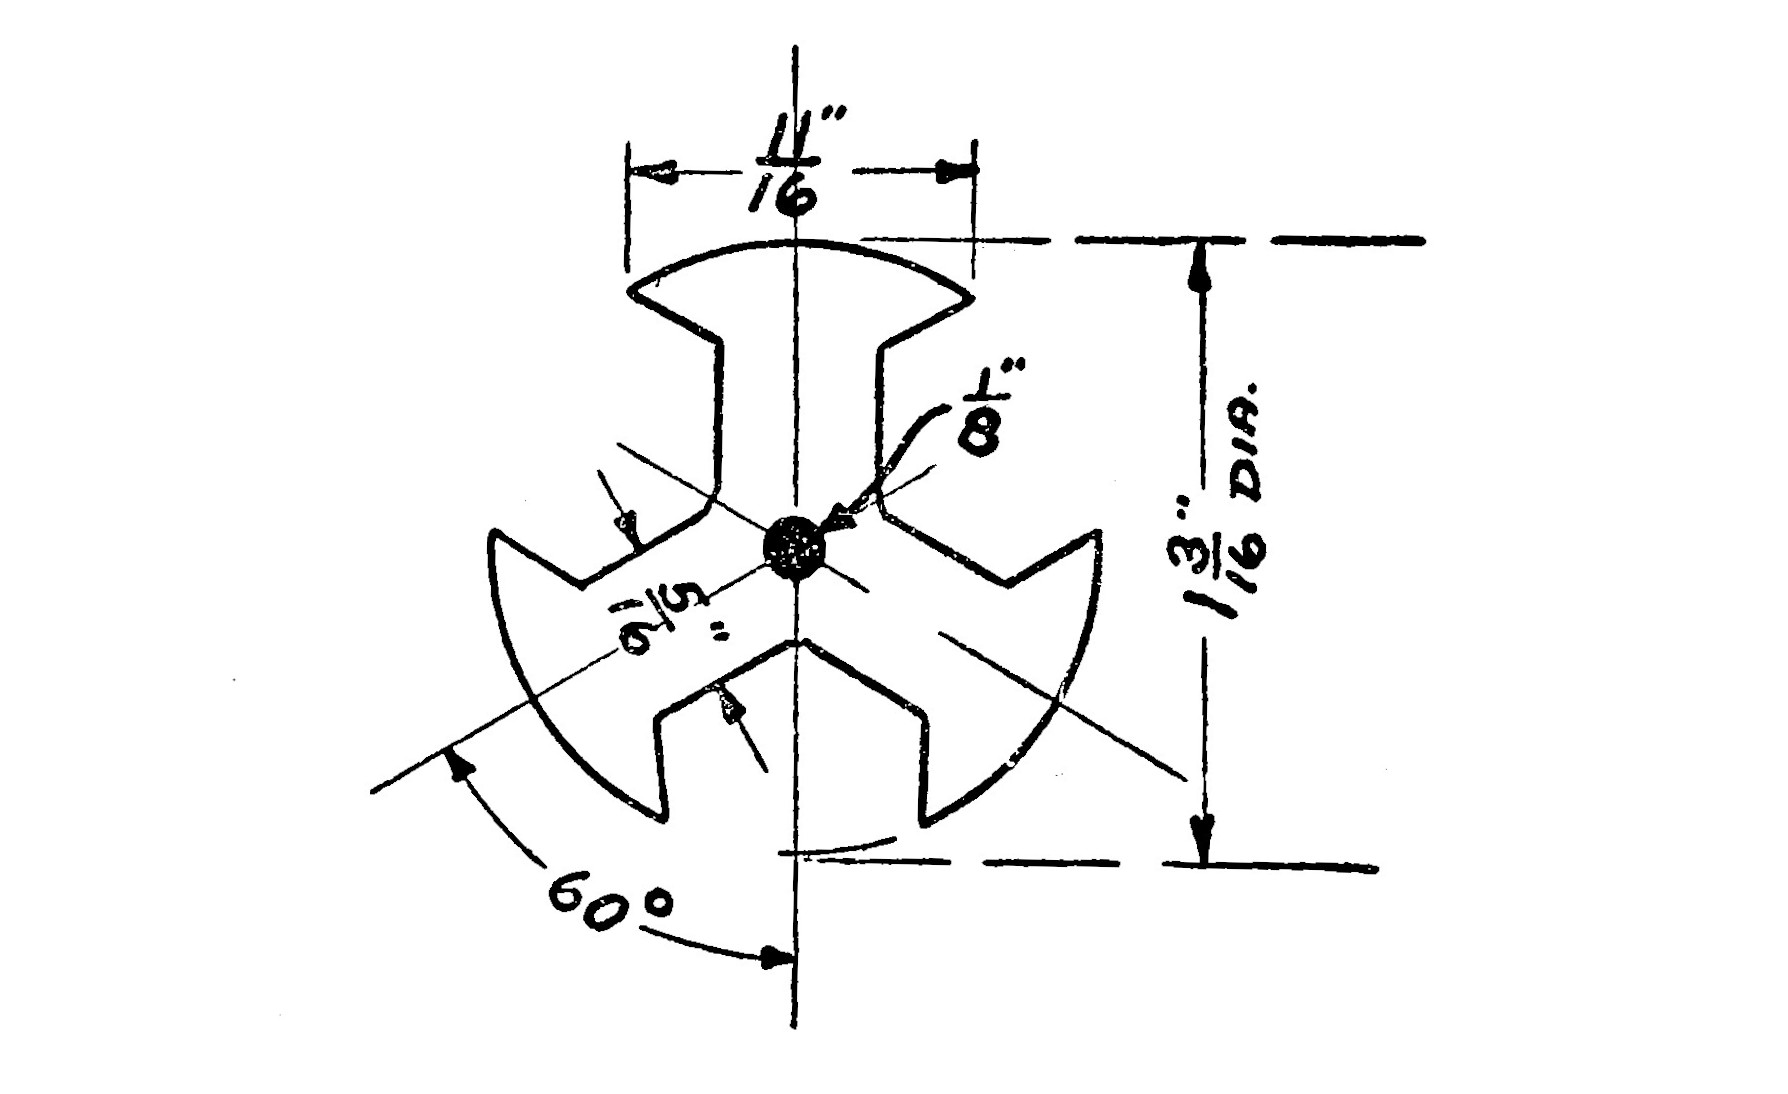 FIG. 43.—Details of the Armature Laminations.